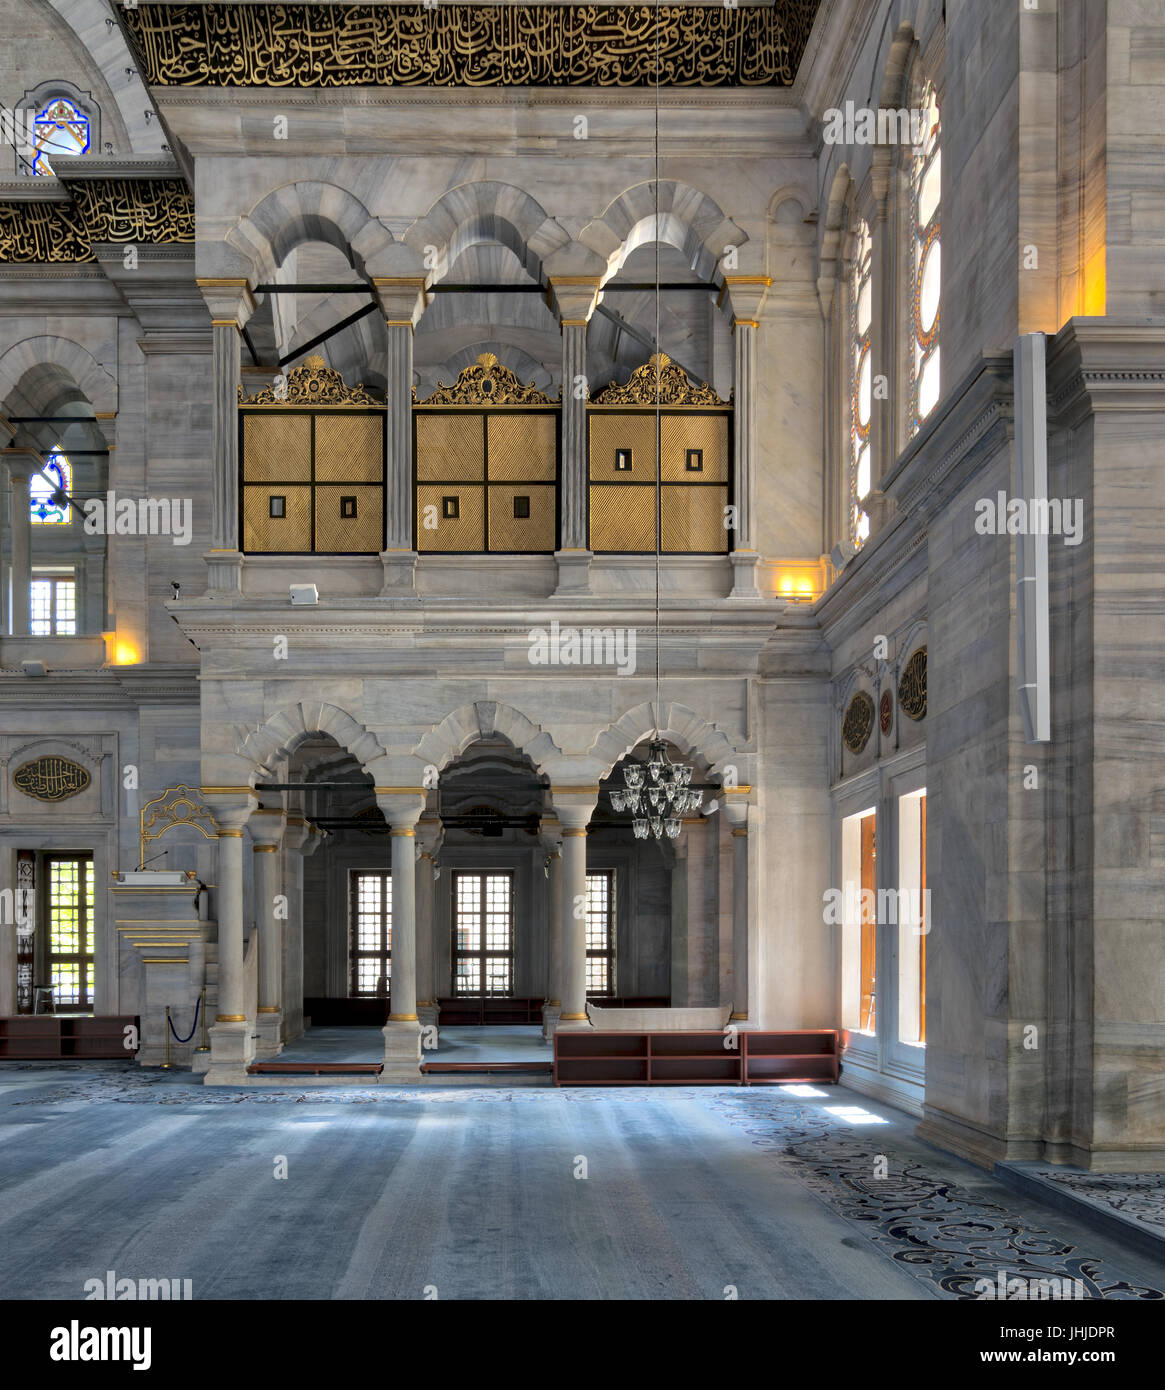 Interior of Nuruosmaniye Mosque, an Ottoman Baroque style mosque built in 1755, with arcades, wooden doors, windows, and blue carpet, located in Shemb Stock Photo